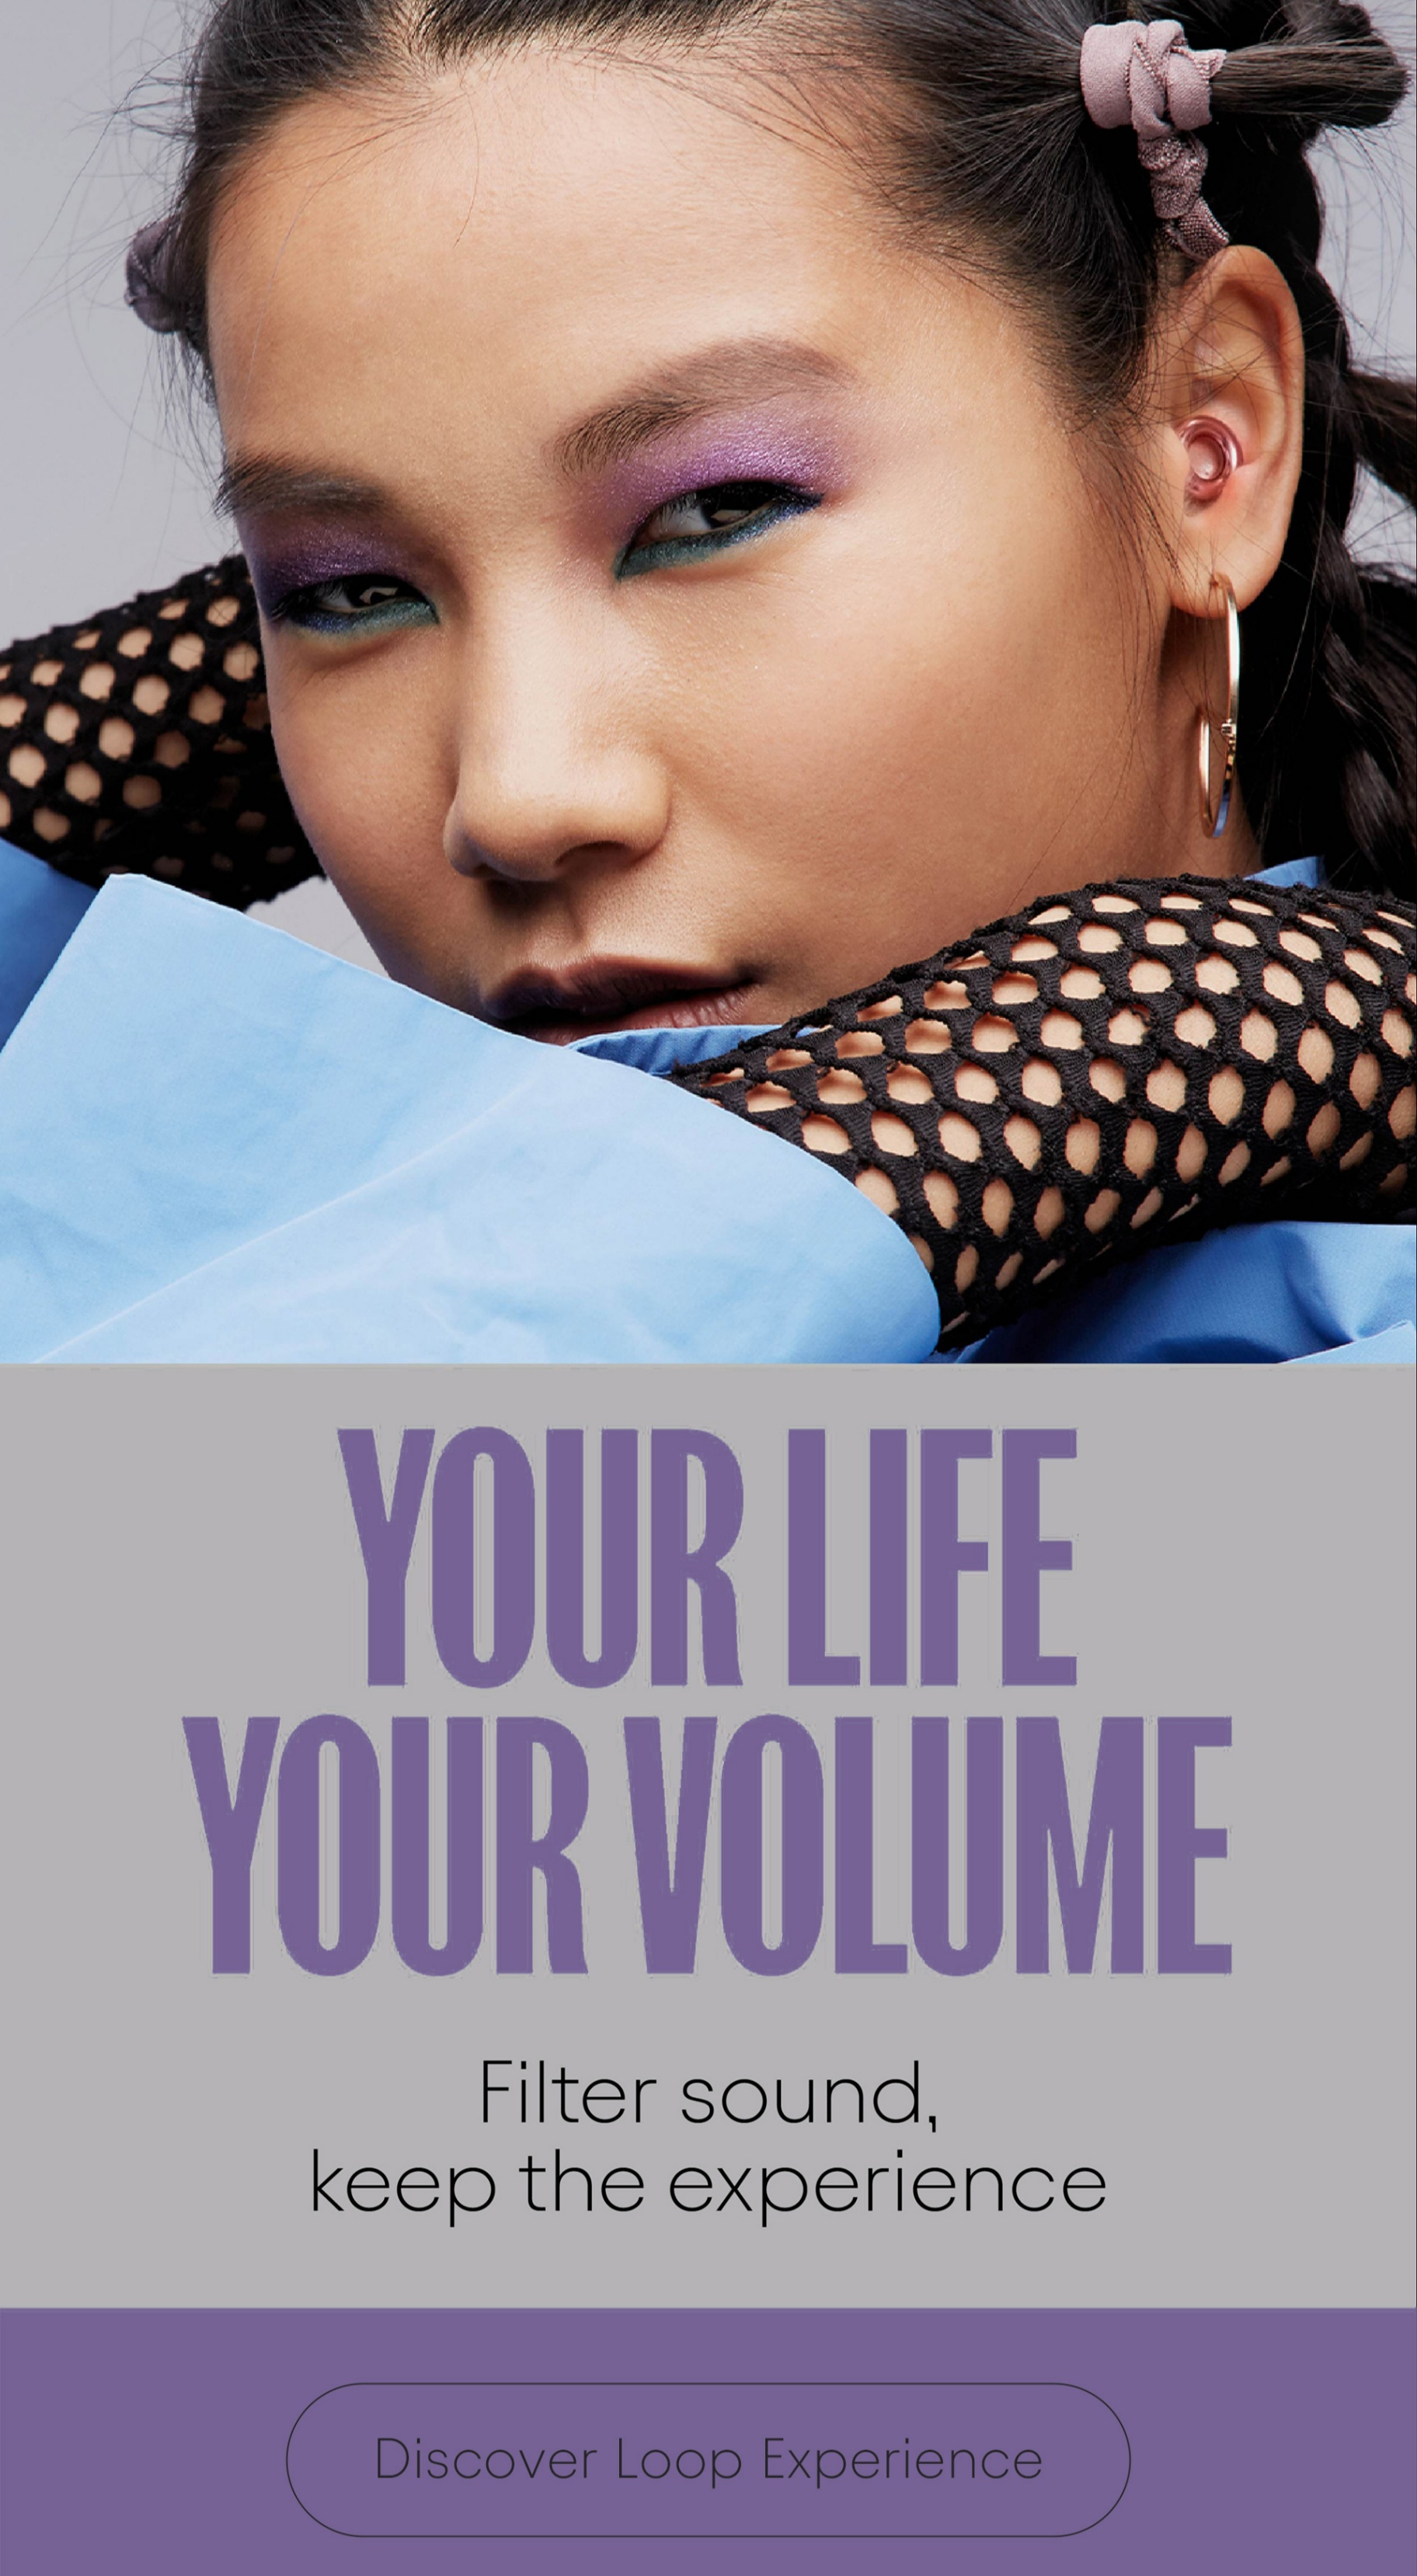 Your life, your volume